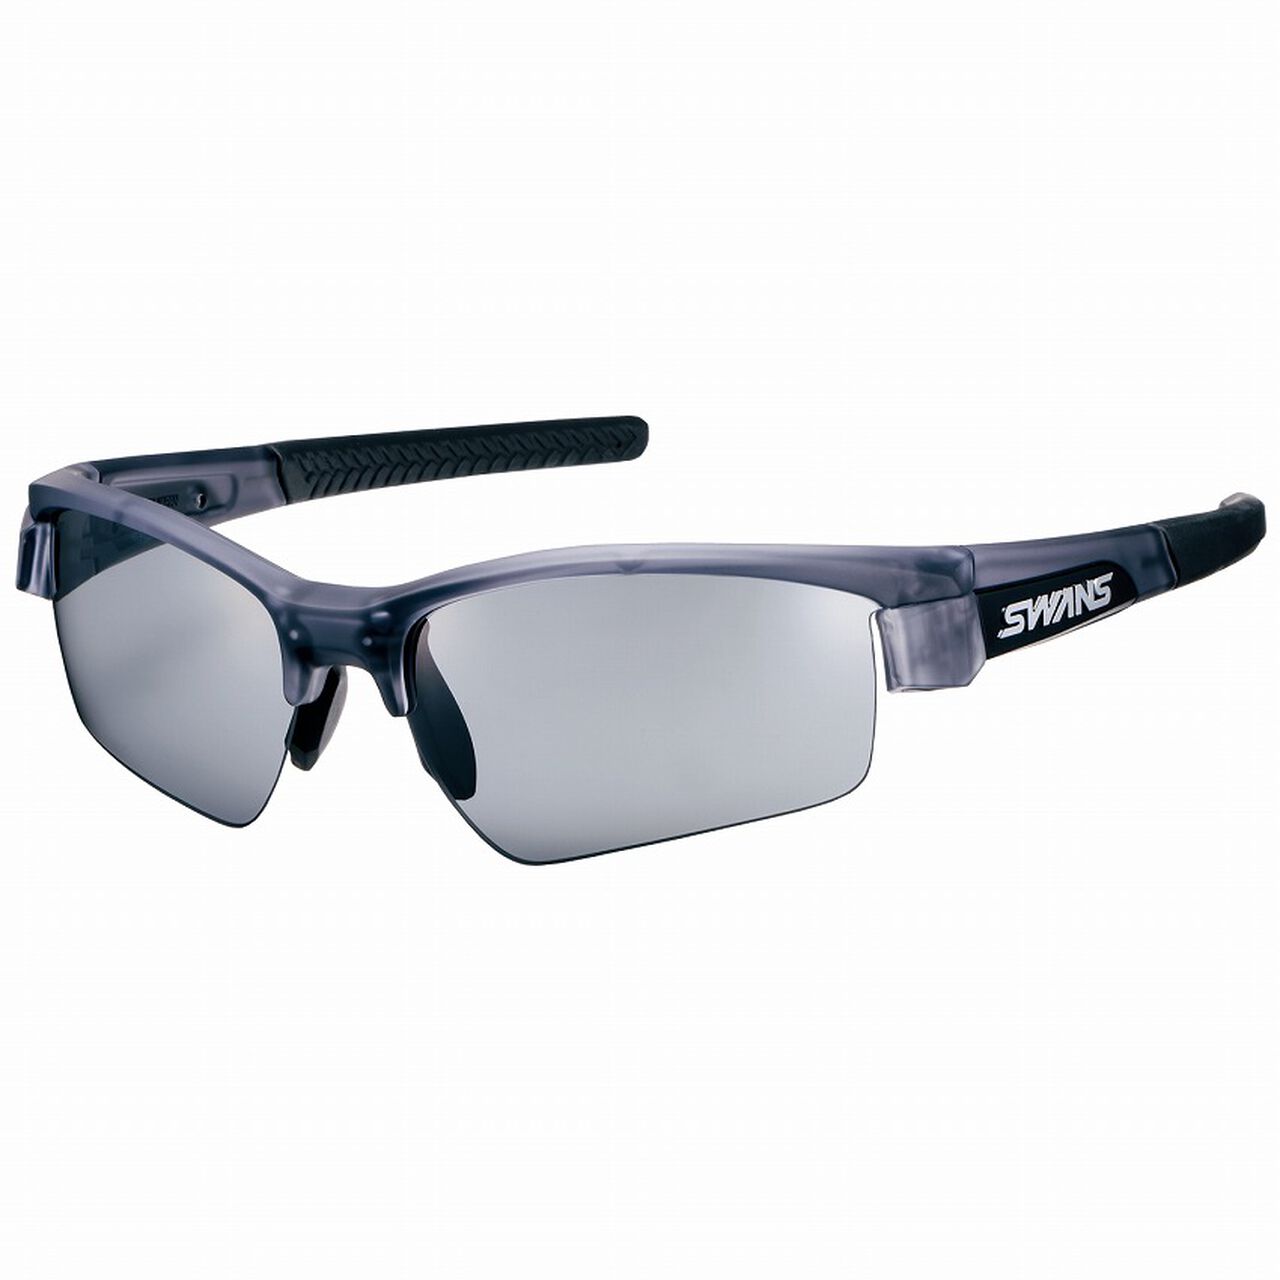 CHALLENGER LI SIN-0066 Photochromic Clear to Smoke,Opt1, large image number 1